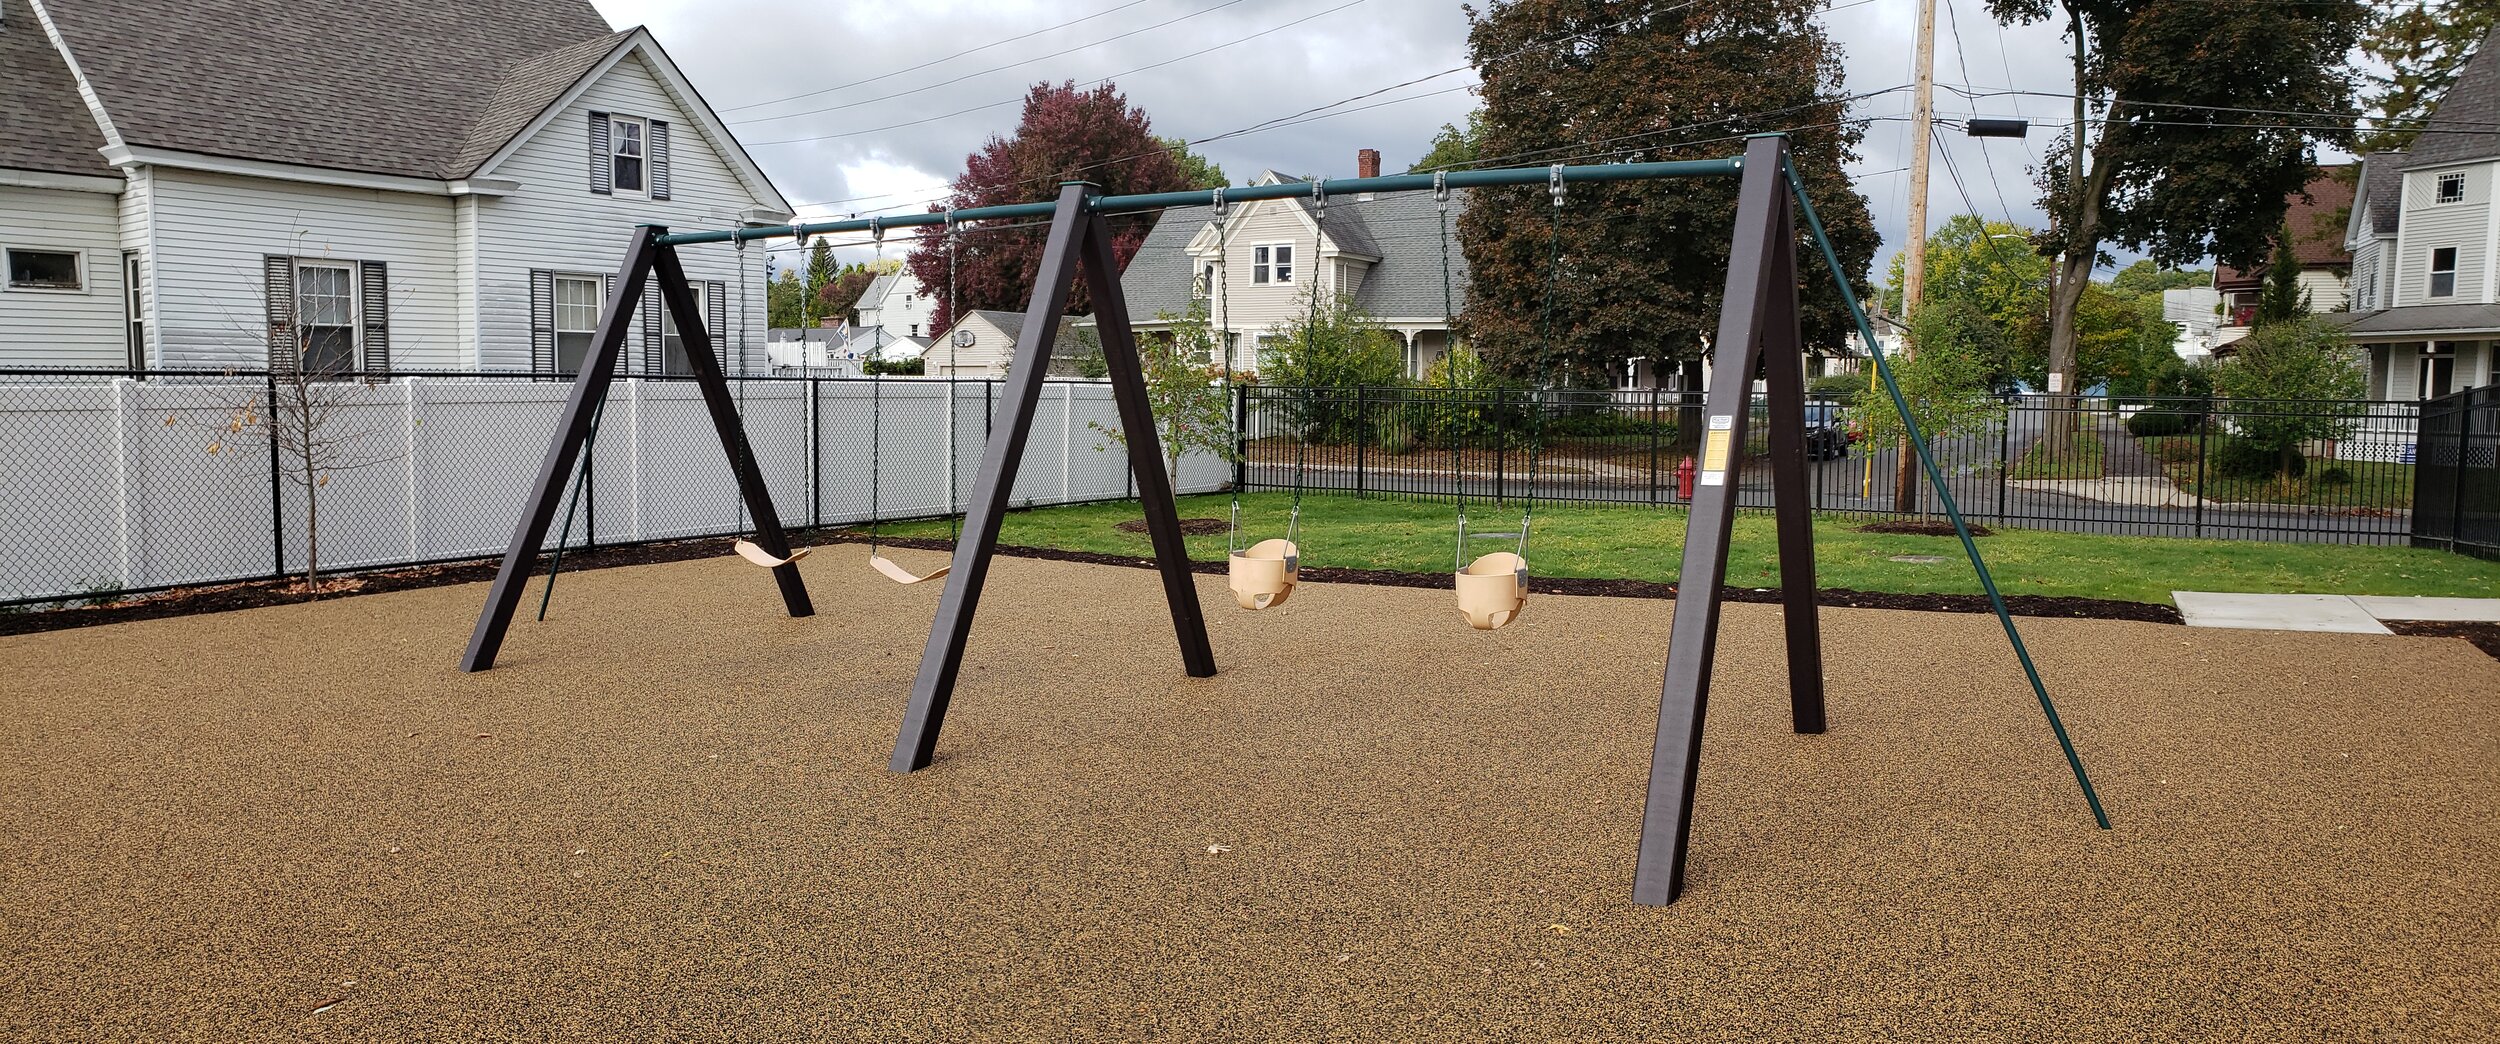 Mosely Street Apartments Playground 2.jpg